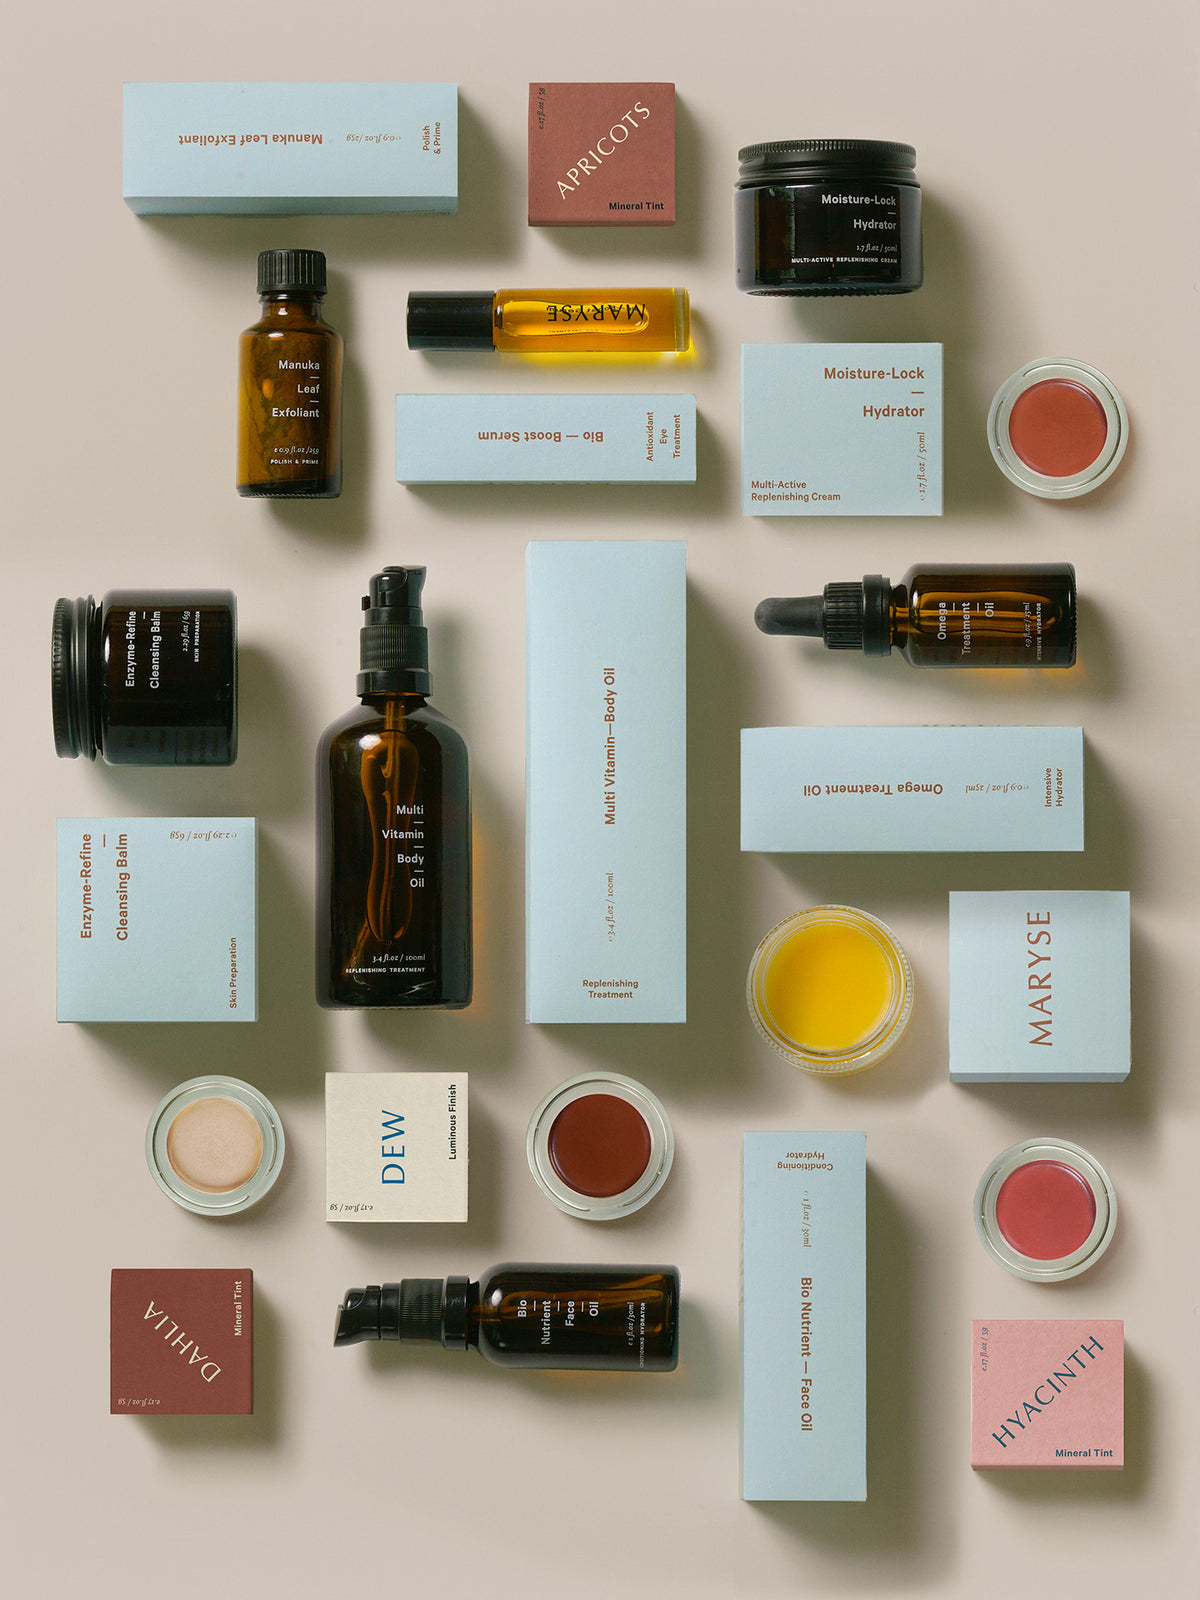 A collection of MARYSE Multi-Vitamin – Body Oil products arranged on a white surface.